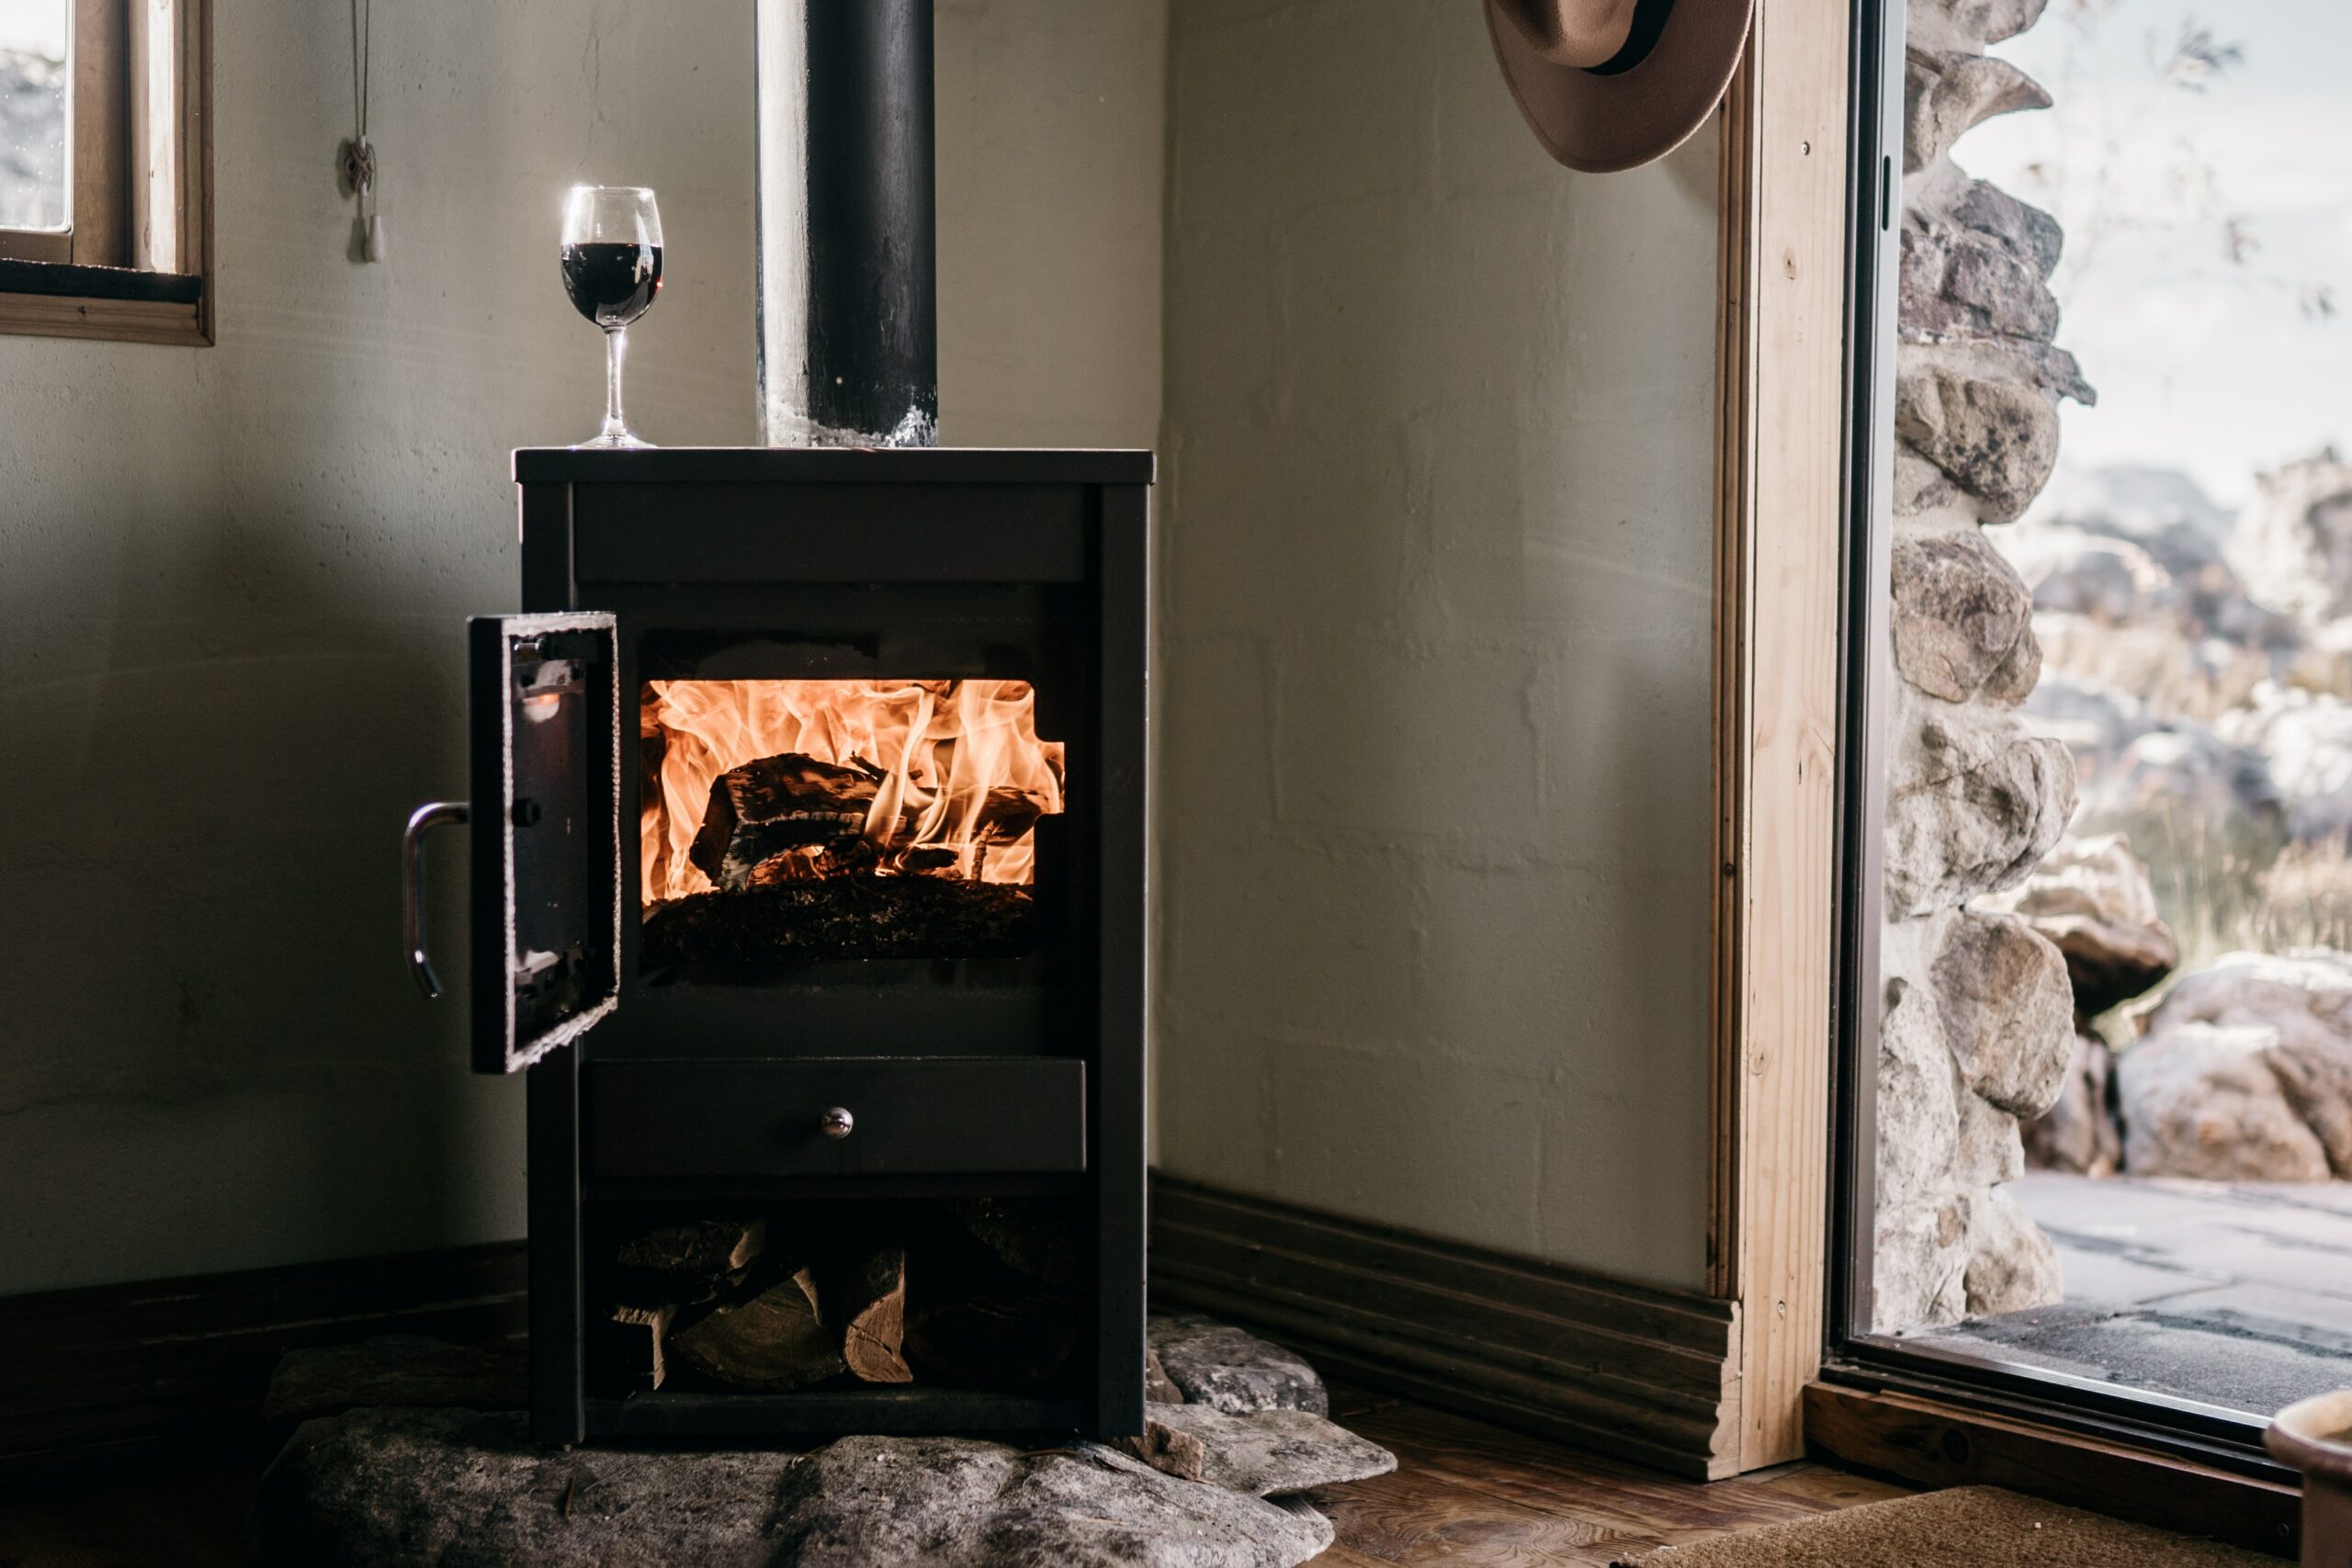 Are Wood Burning Stoves Bad for the Environment? 